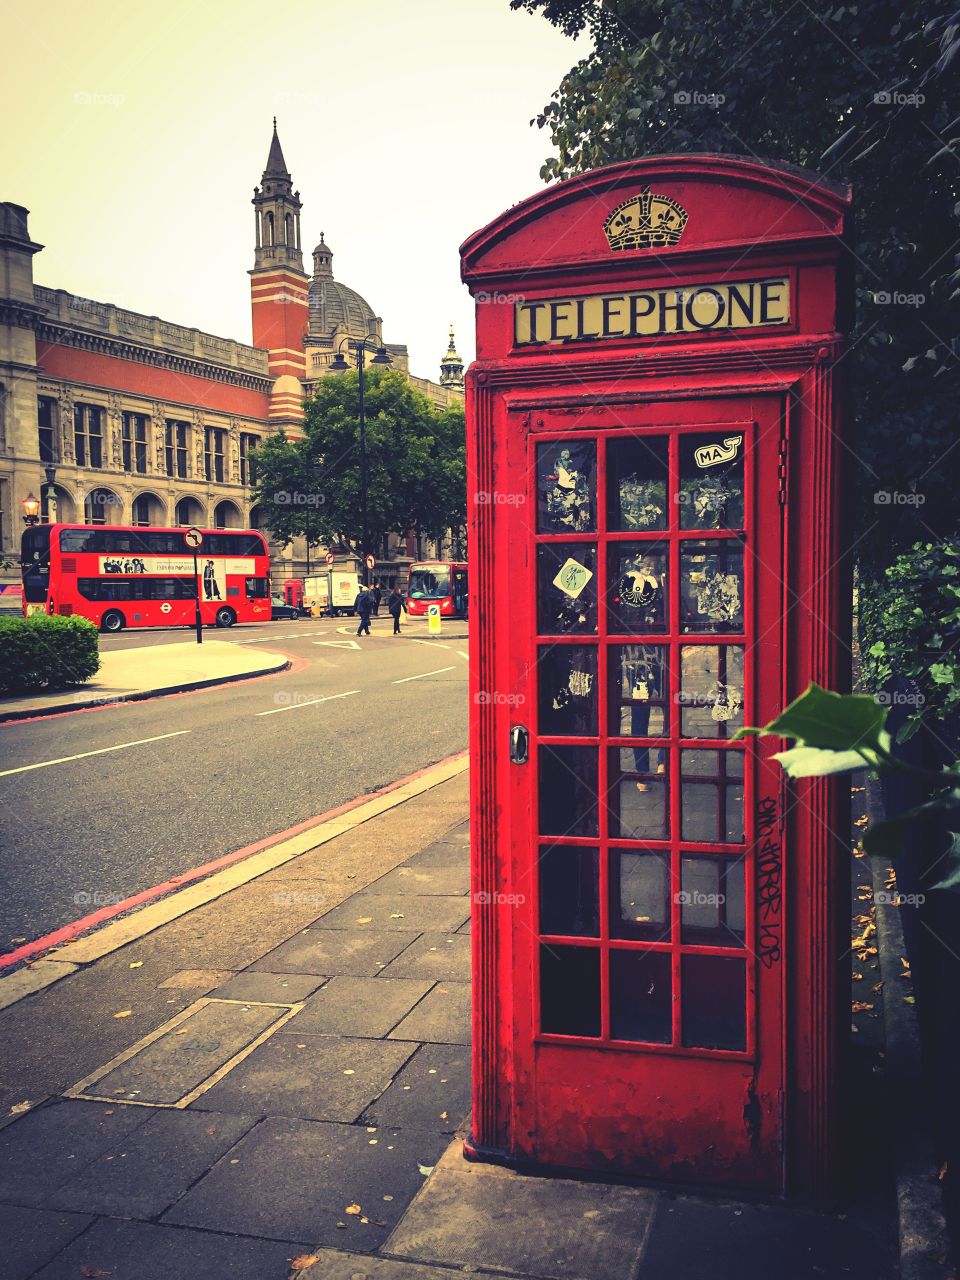 You are in London. Red telephone box and bus by the Victoria and Albert Museum, South Kensington, England.